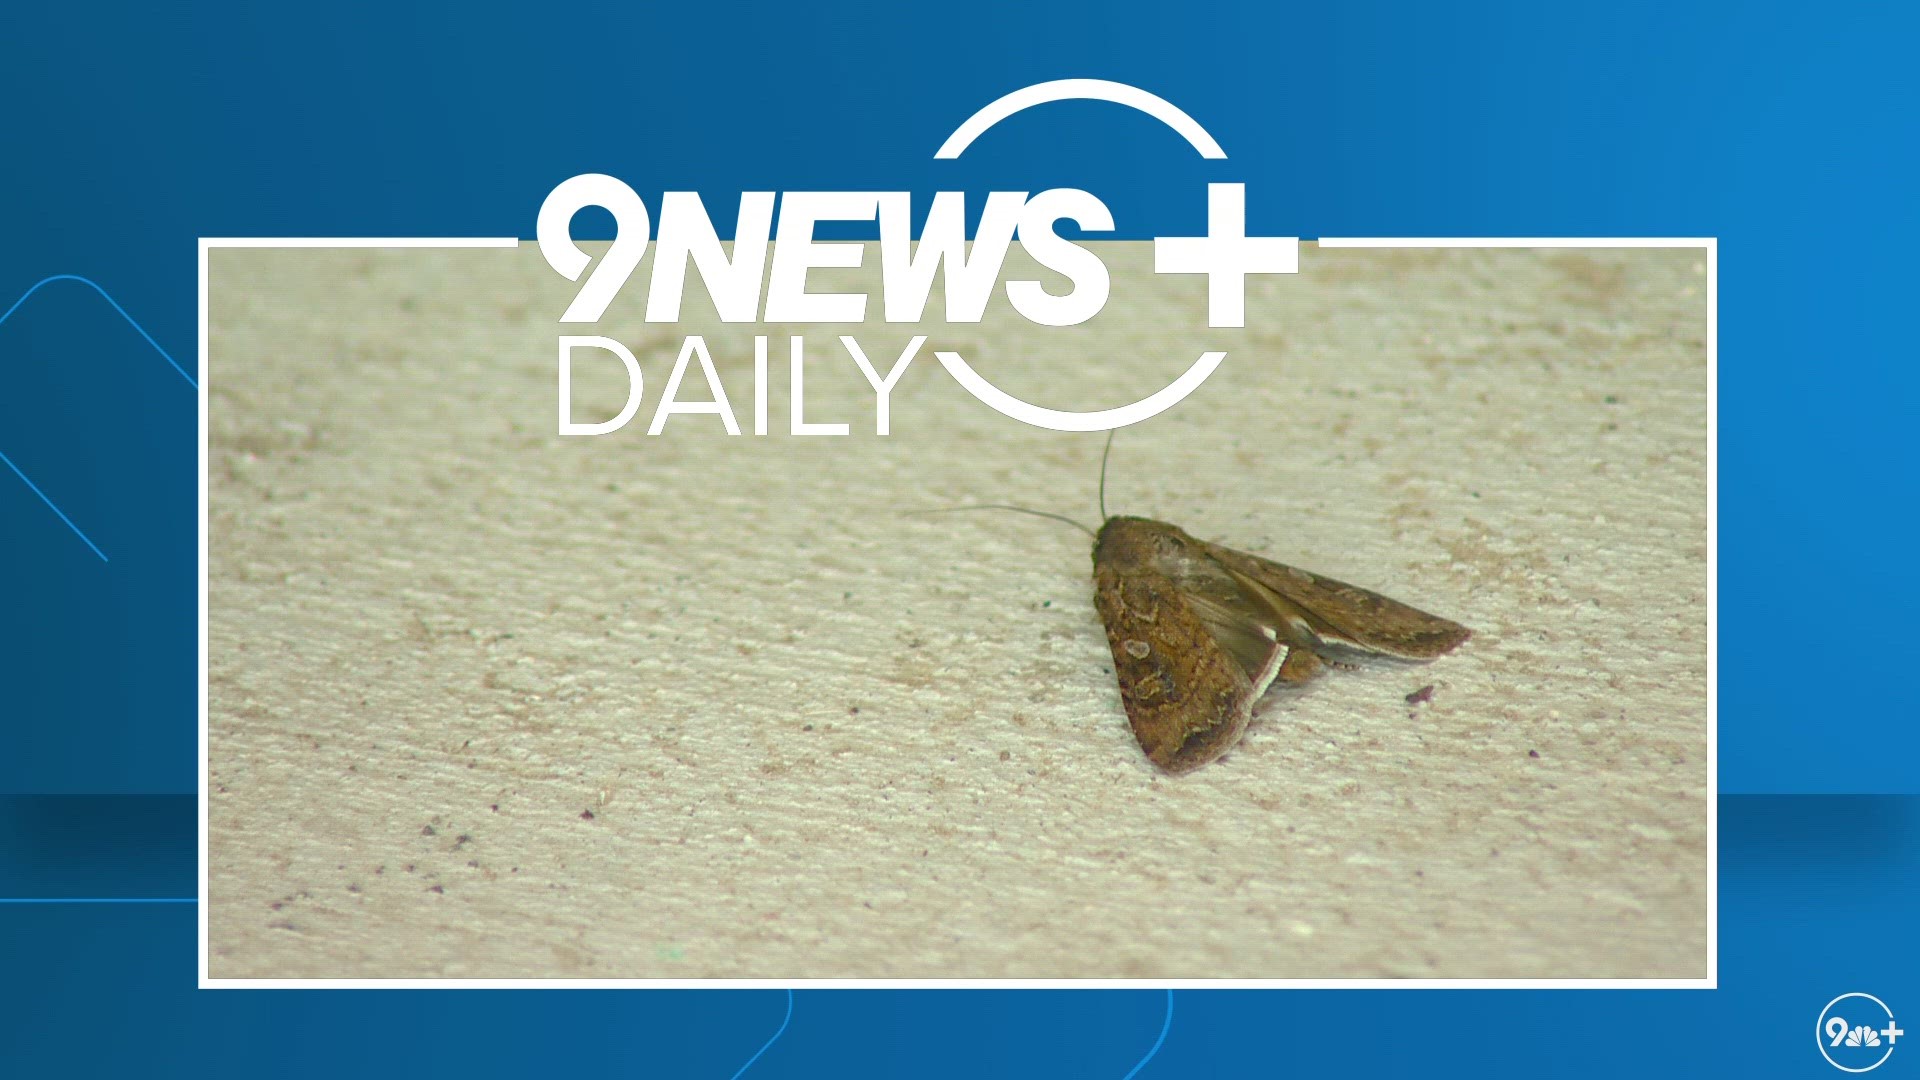 While it may be tempting to swat or kill the miller moths around the house, experts say the moths are important to Colorado's ecosystem.